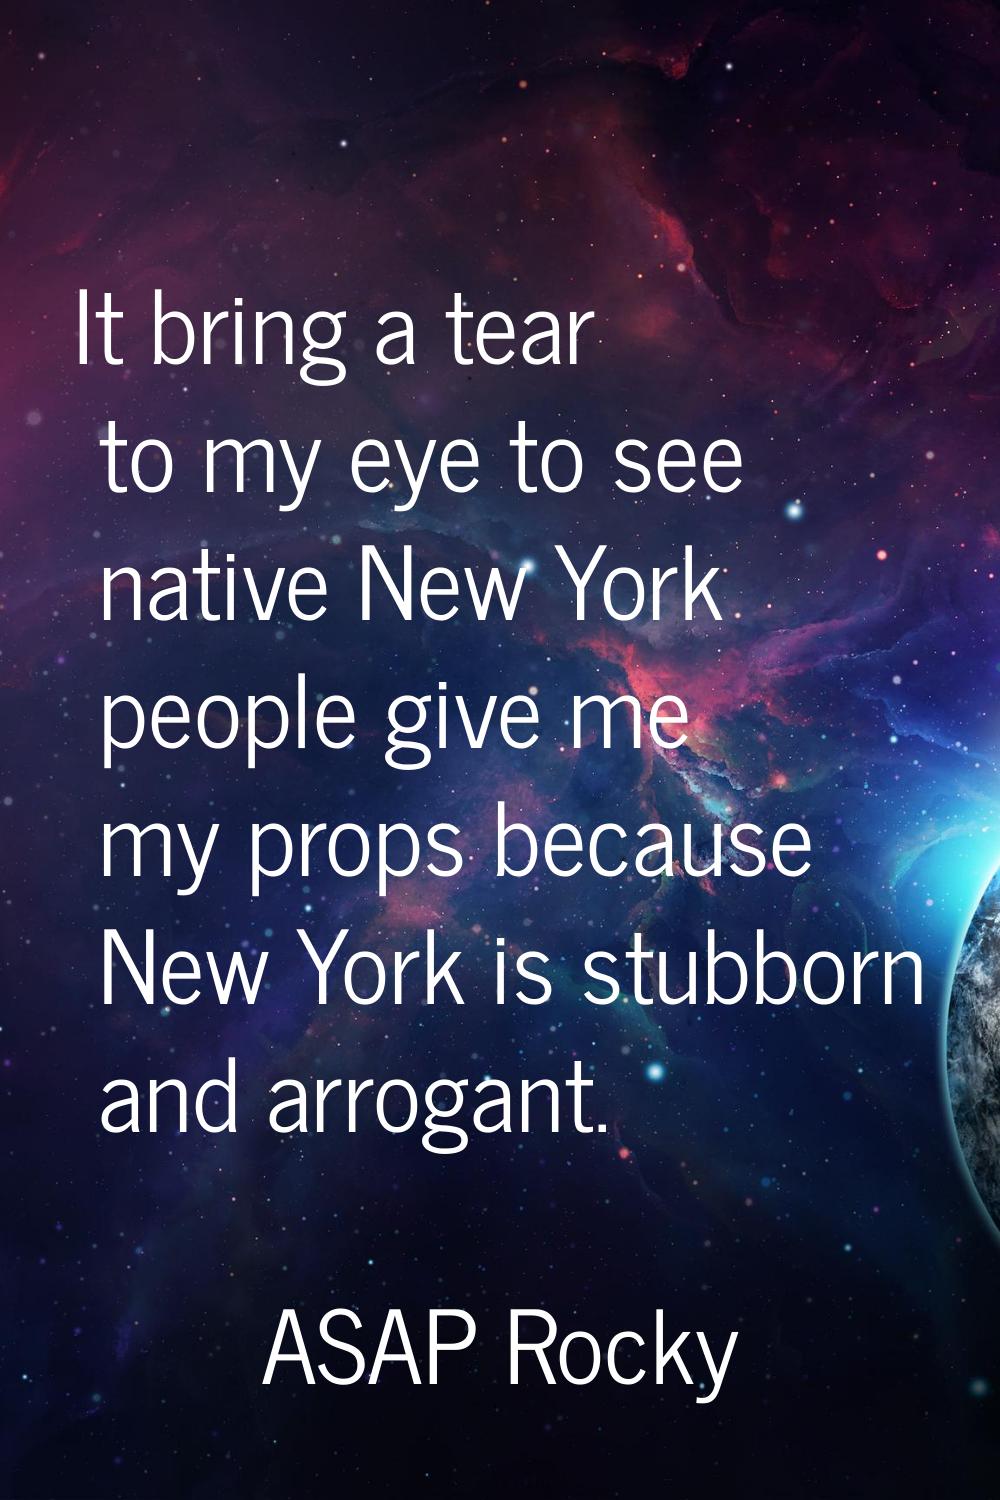 It bring a tear to my eye to see native New York people give me my props because New York is stubbo